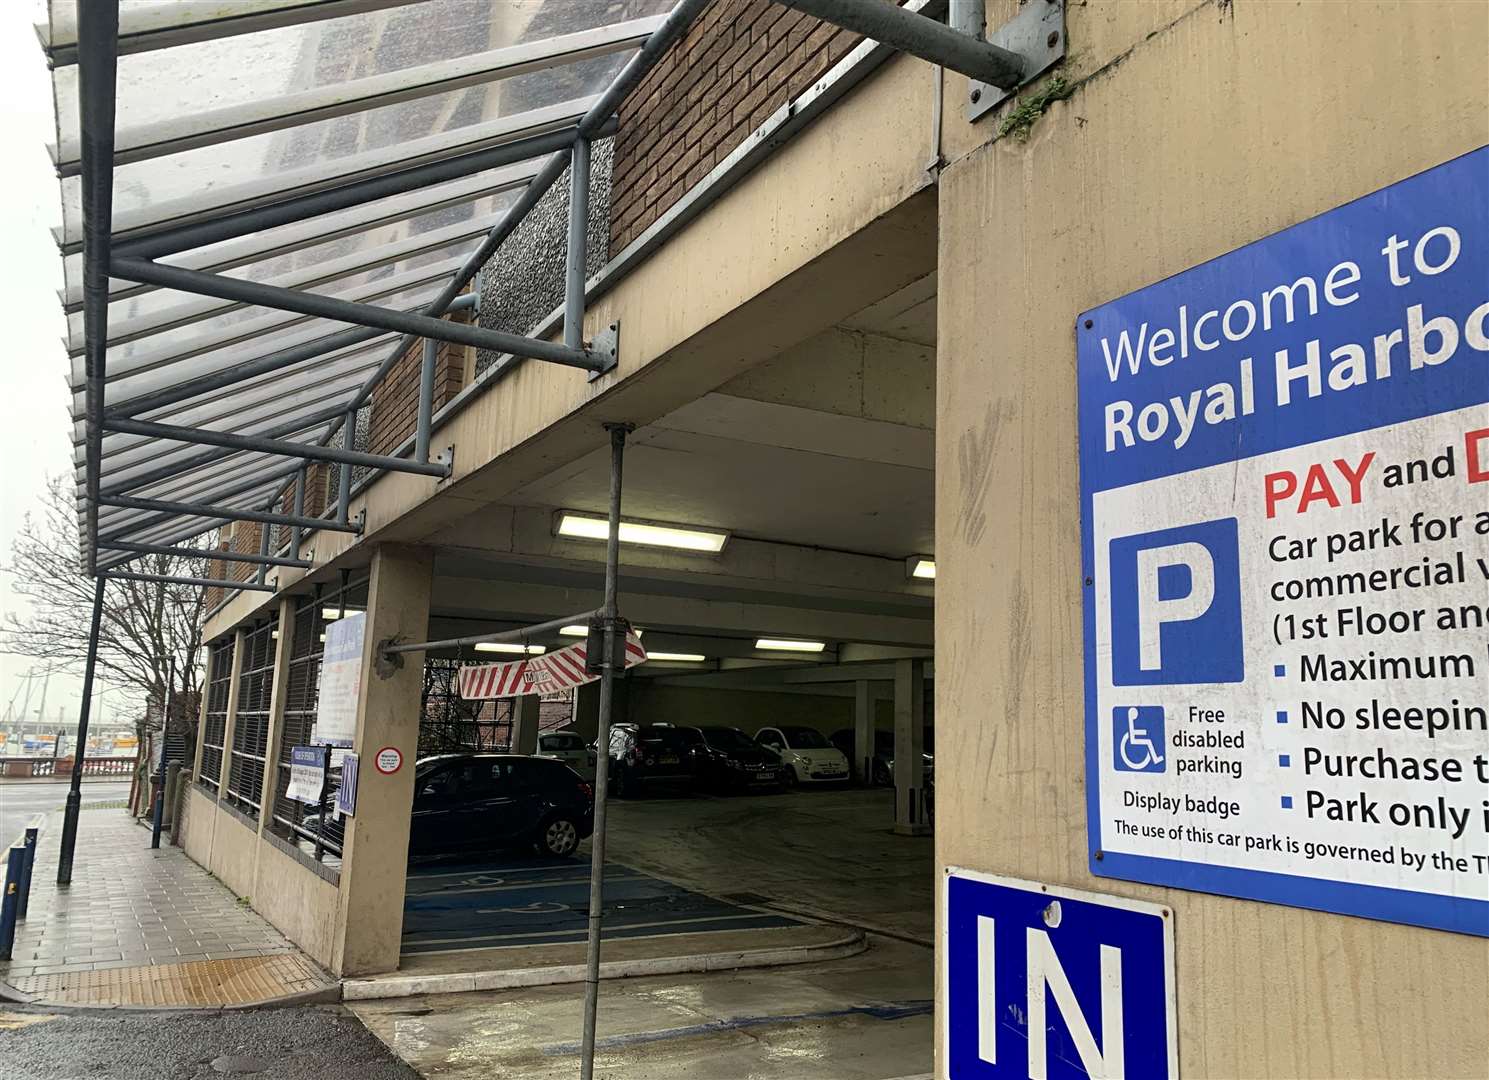 The car park in Ramsgate costs £1.60 an hour